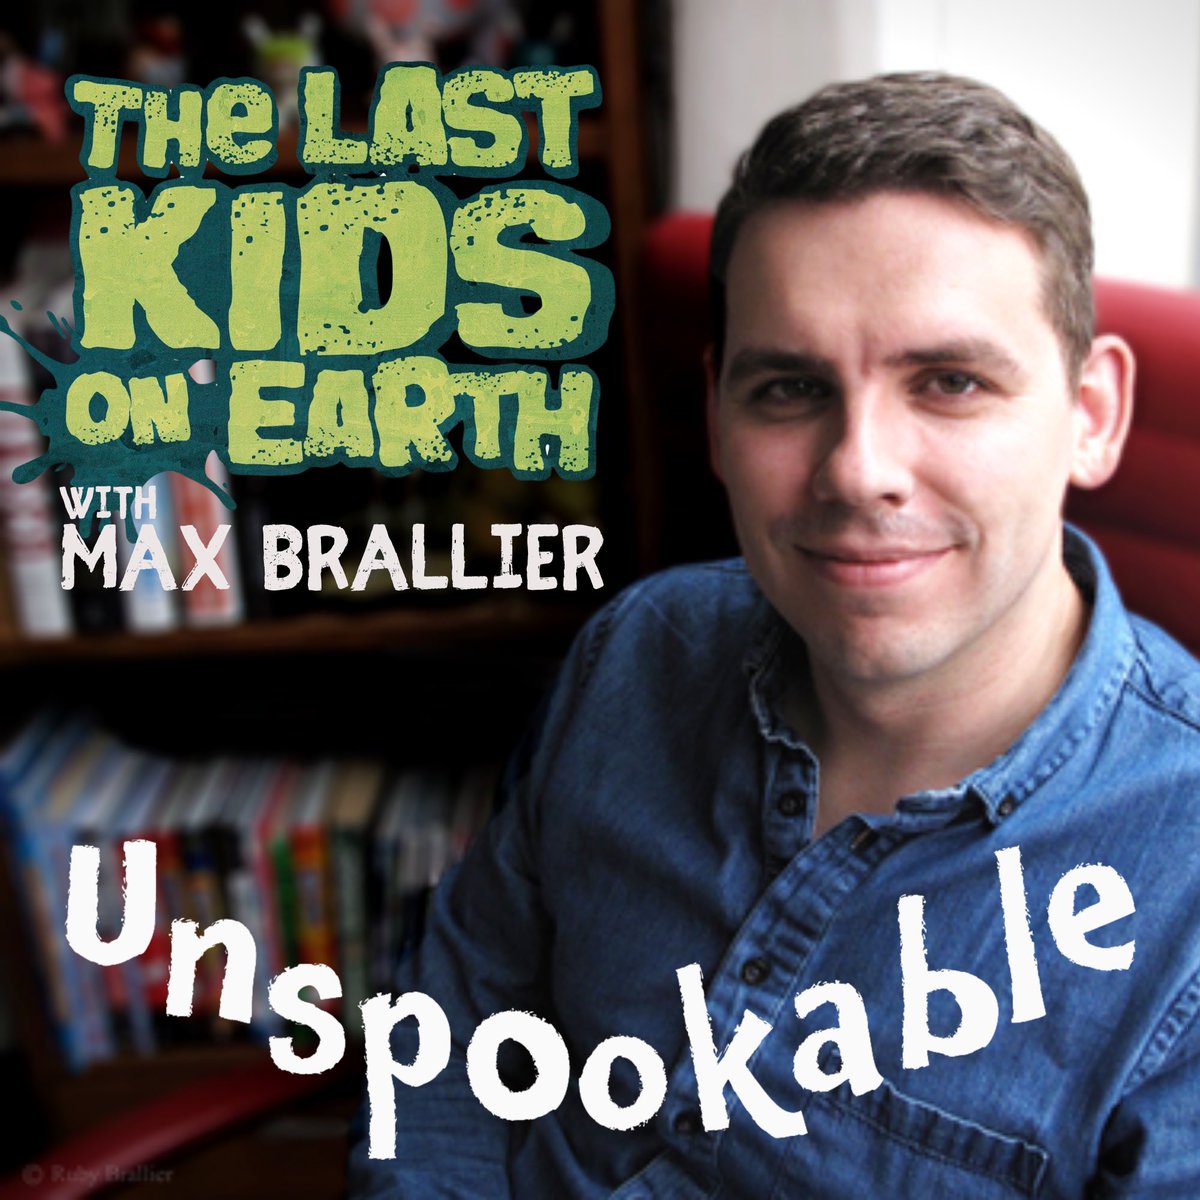 We’re talking monster apocalypse, middle-grade scares, and all things The Last Kids on Earth this week with author Max Brallier. podcasts.apple.com/us/podcast/uns…